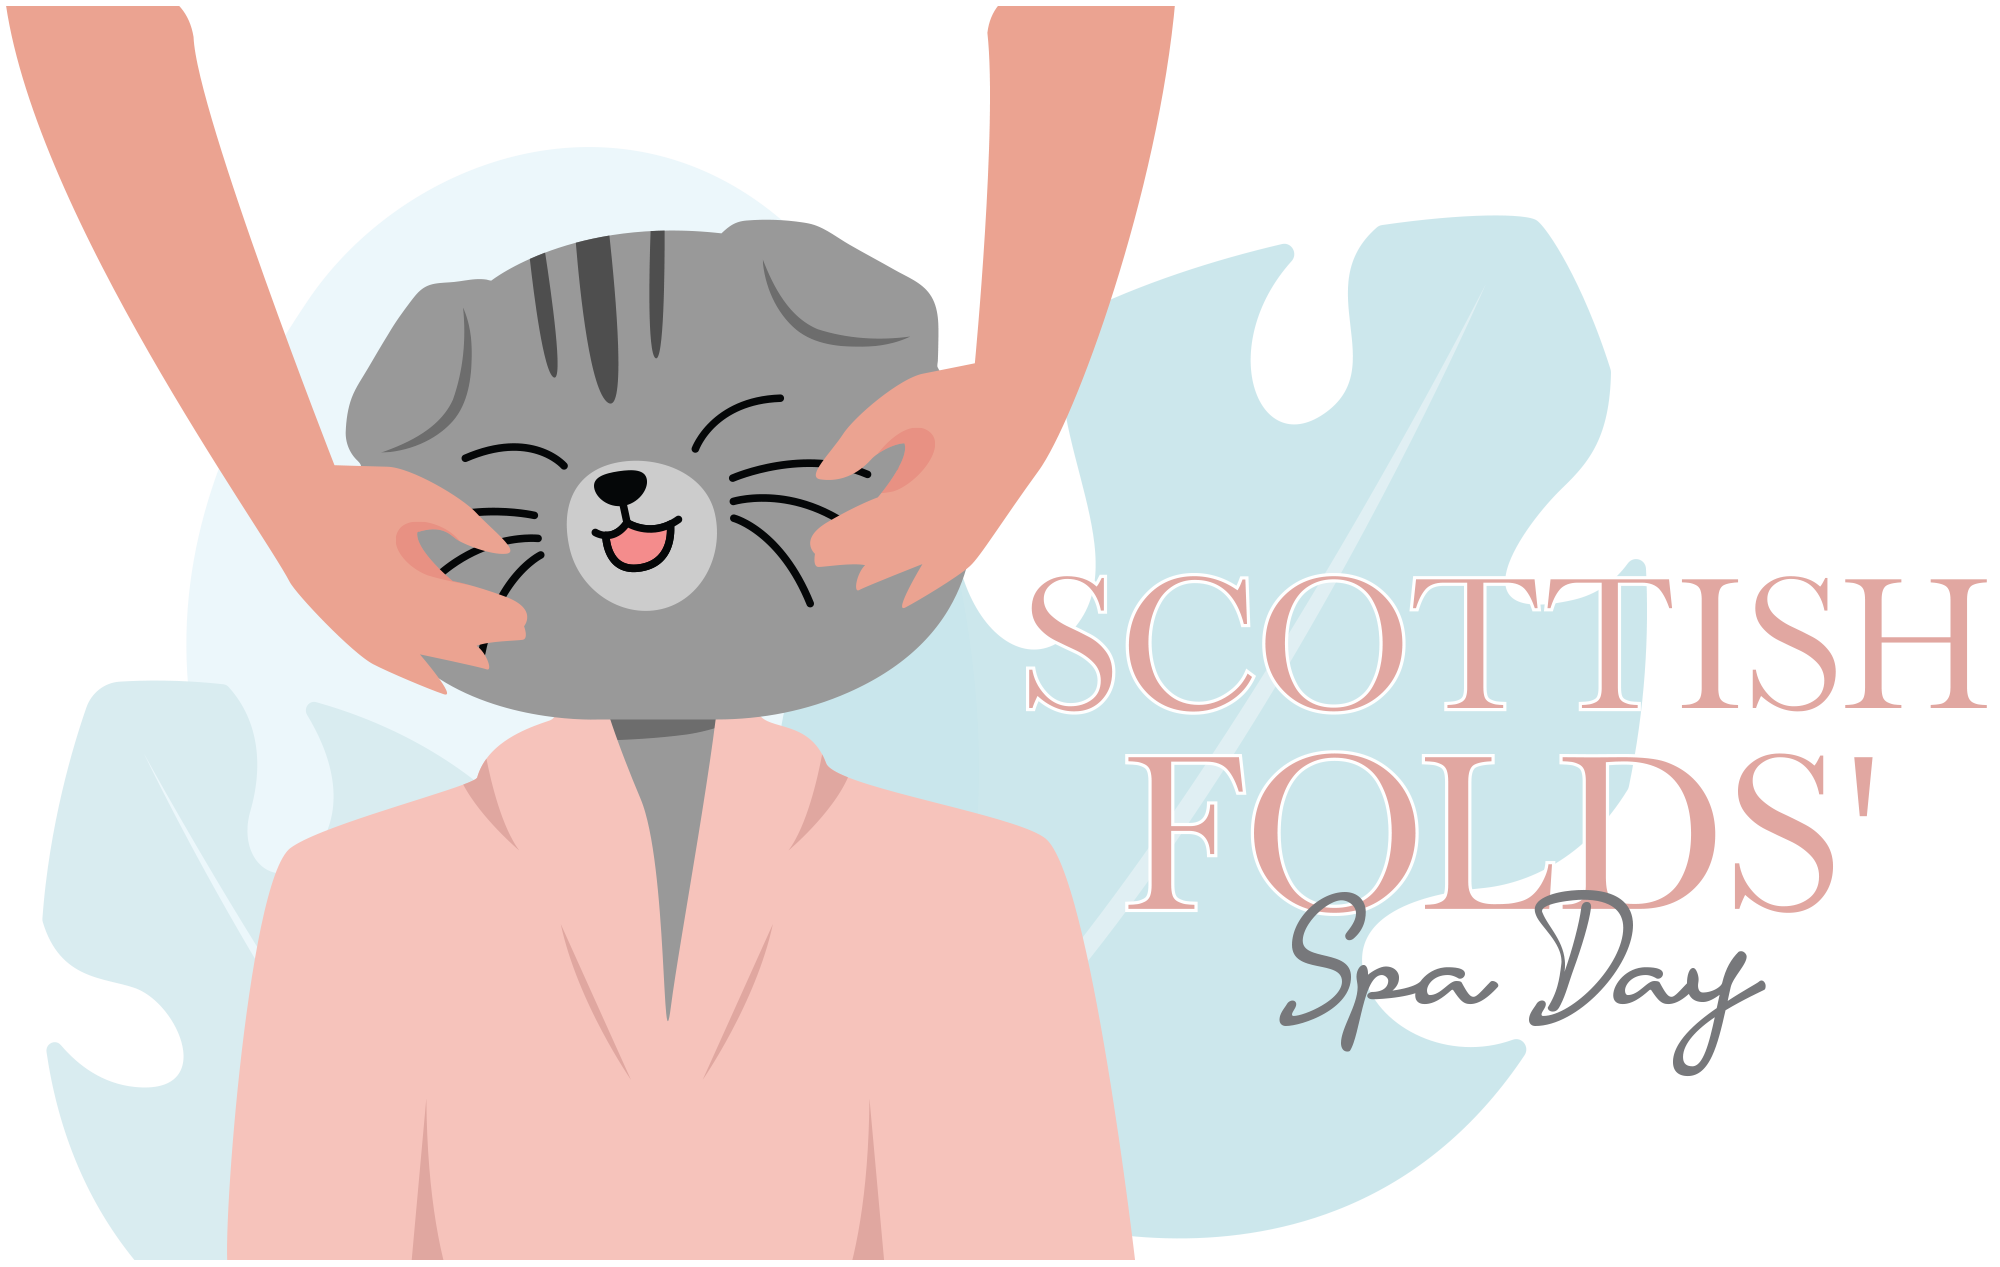 Vector minimalist illustration of a person's hands touching a cat's cheeks as the cat is relaxed and happy with the cat's head resembling a person's head plus the cat is wearing a pink spa robe alongside typographic title Scottish Folds' Spa Day